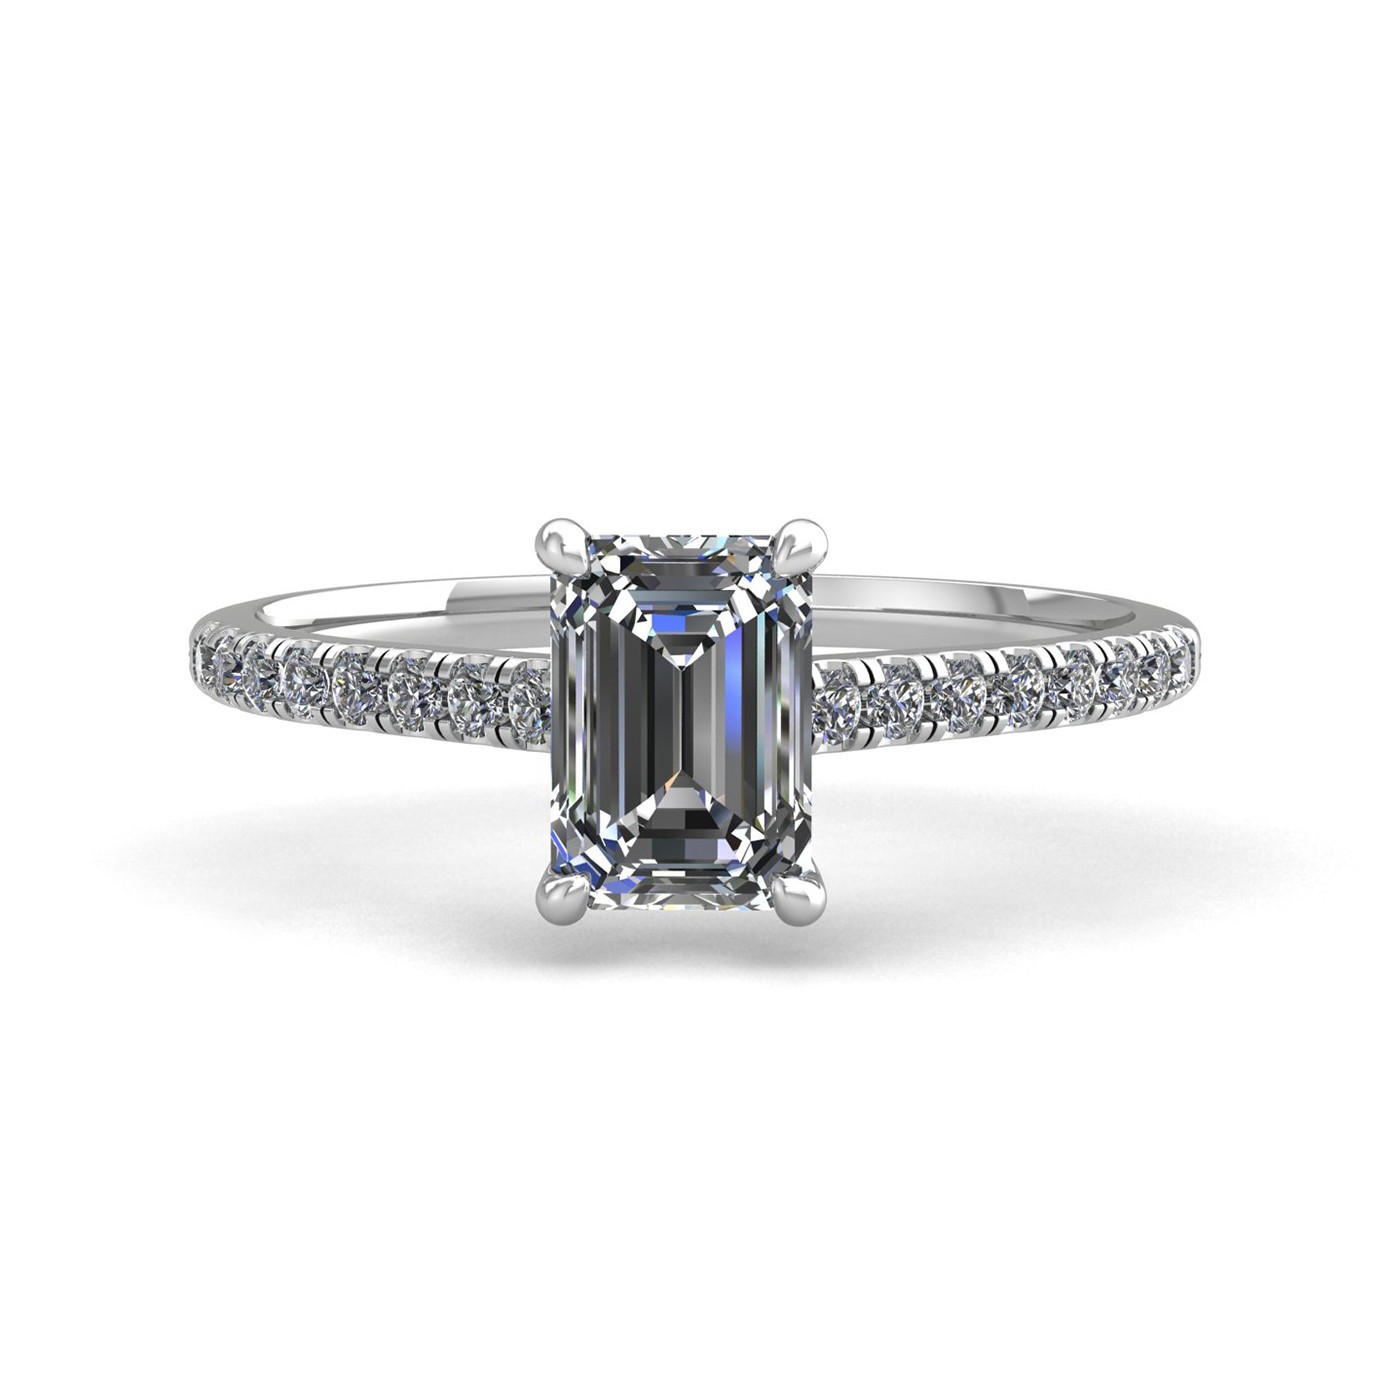 18k white gold  0,50 ct 4 prongs emerald cut diamond engagement ring with whisper thin pavÉ set band Photos & images